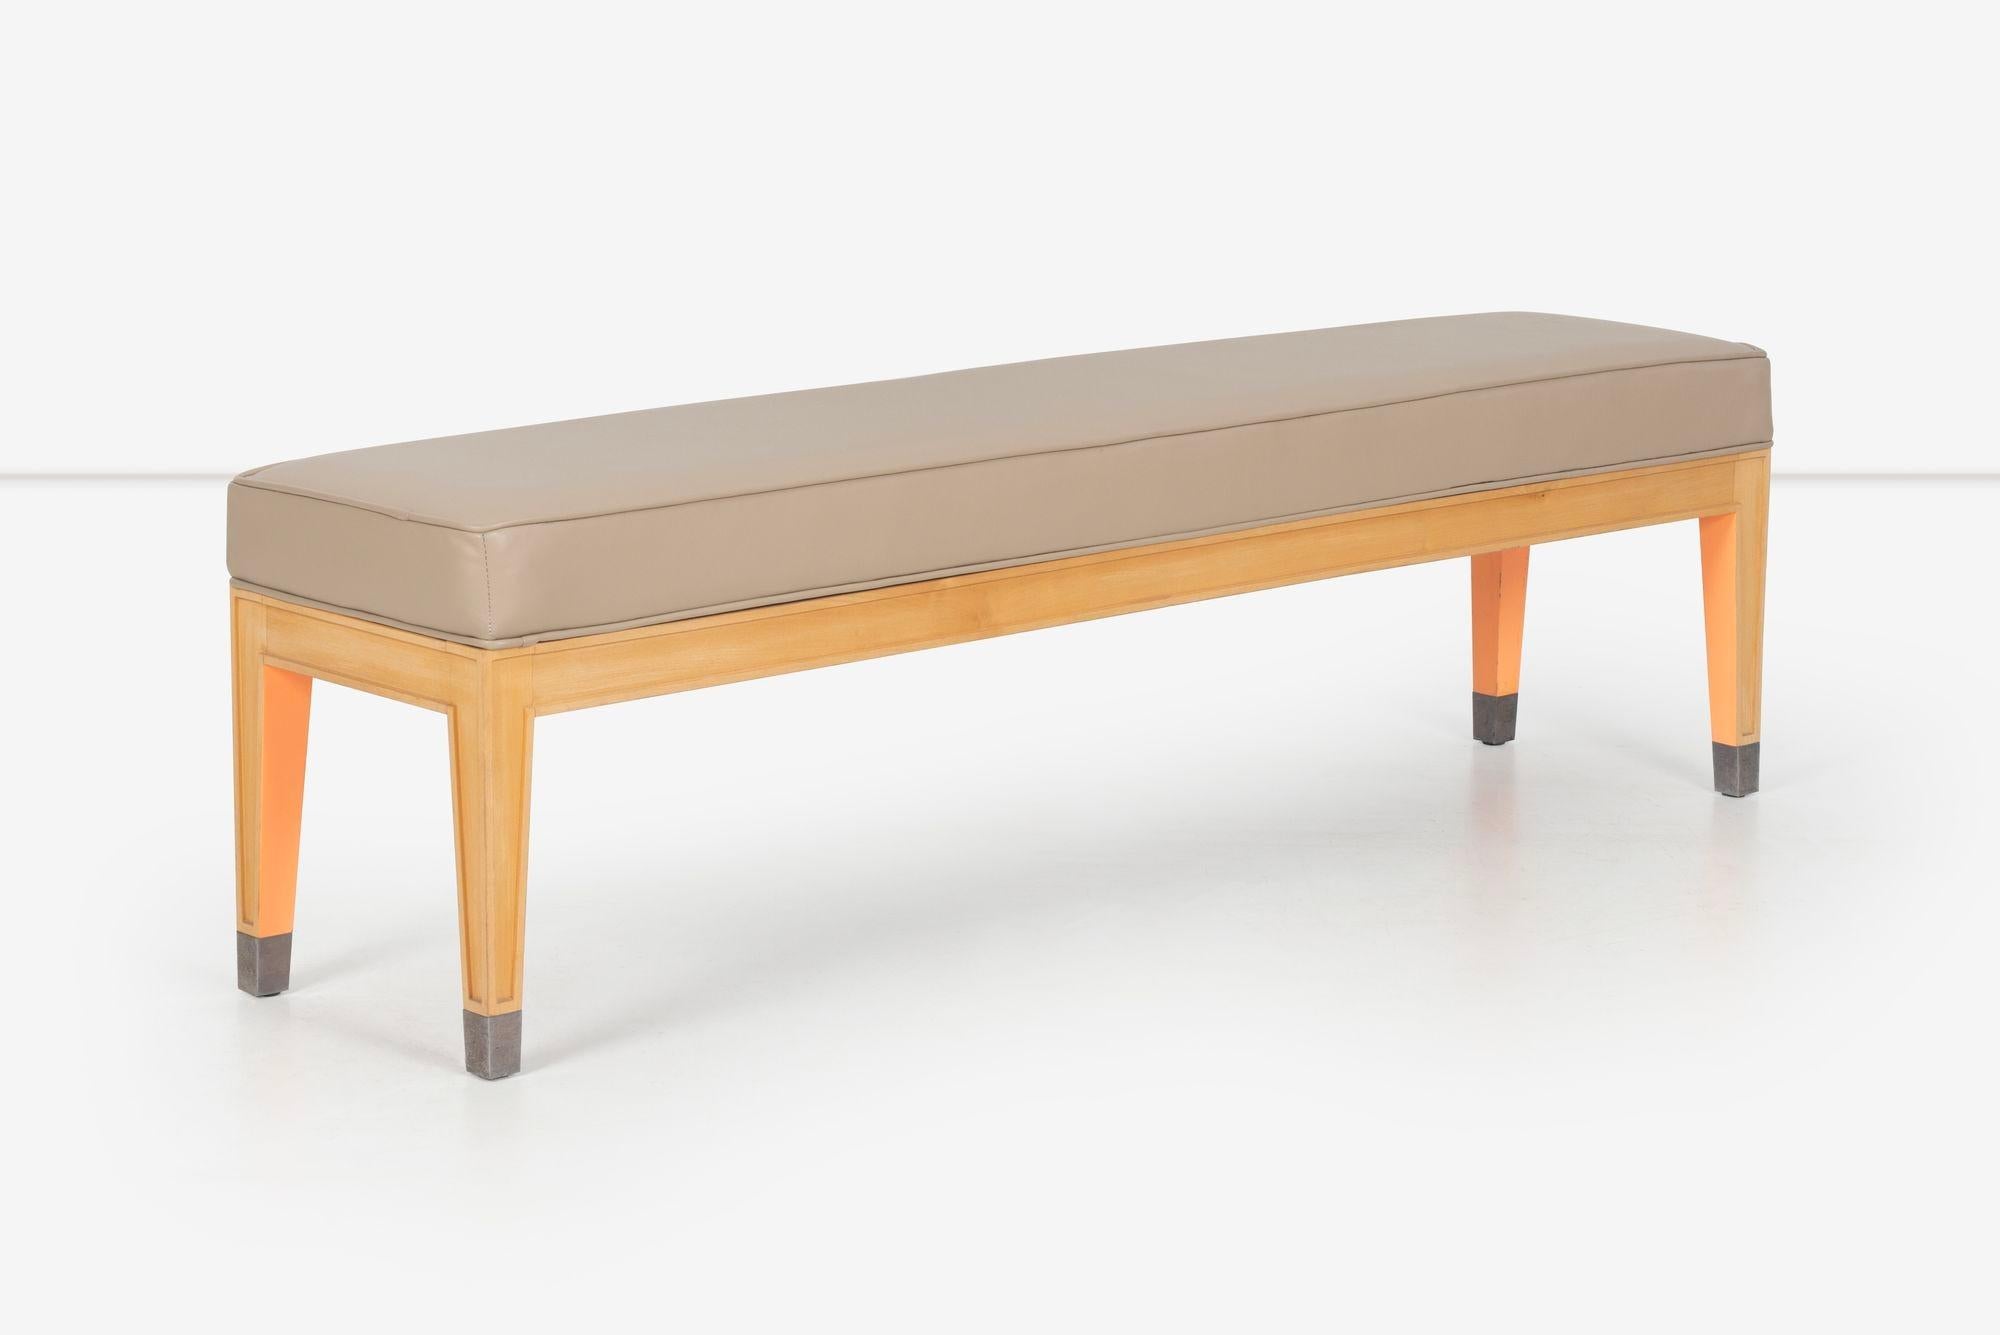 Phillipe Starck Bench from The Clift Hotel San Fransisco C.A. In Good Condition For Sale In Chicago, IL